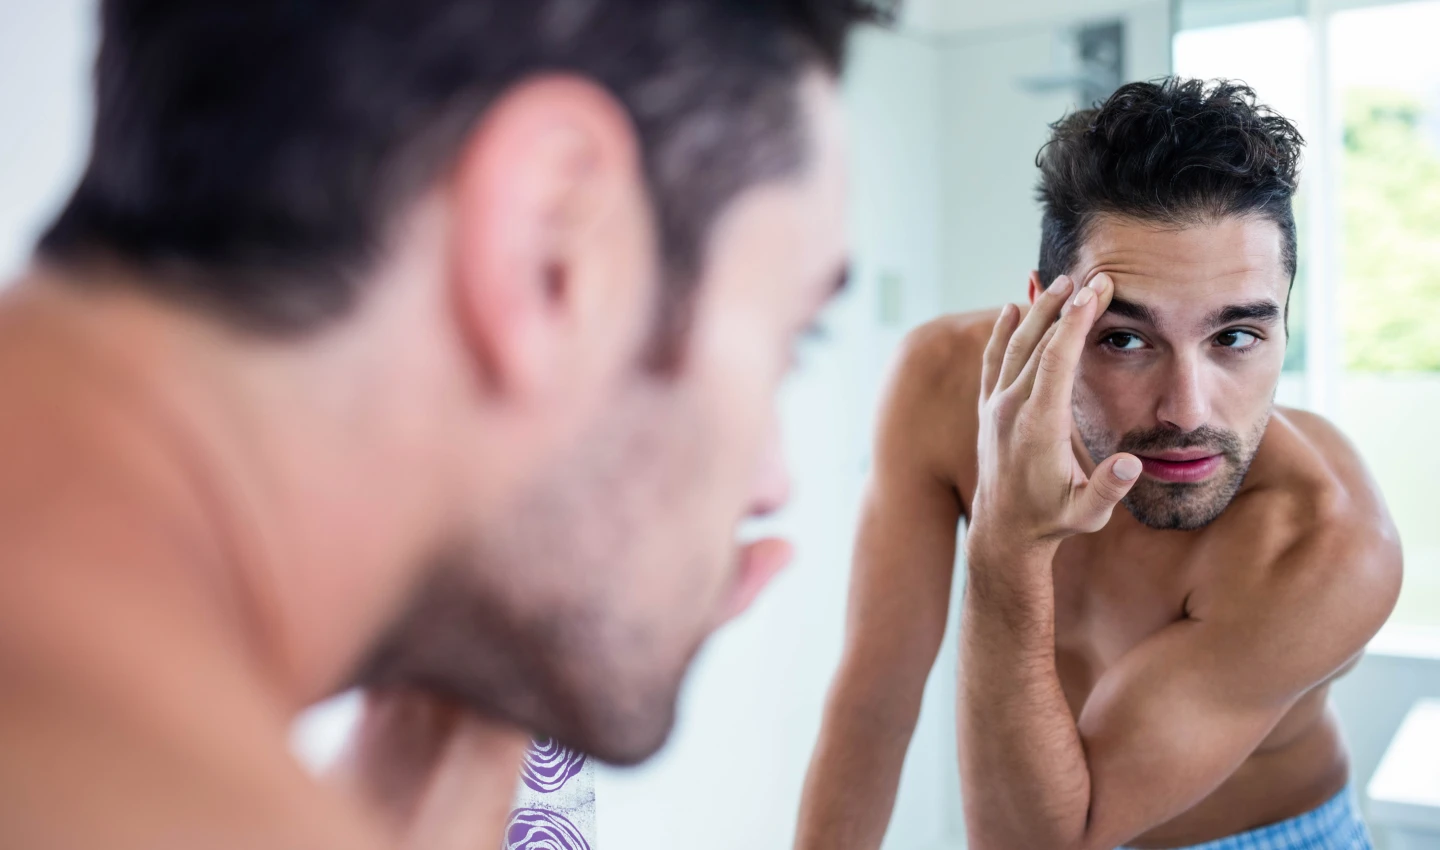 Shaved man looking at mirror with a satisfied expression on his face, representing skincare mistakes for men article.